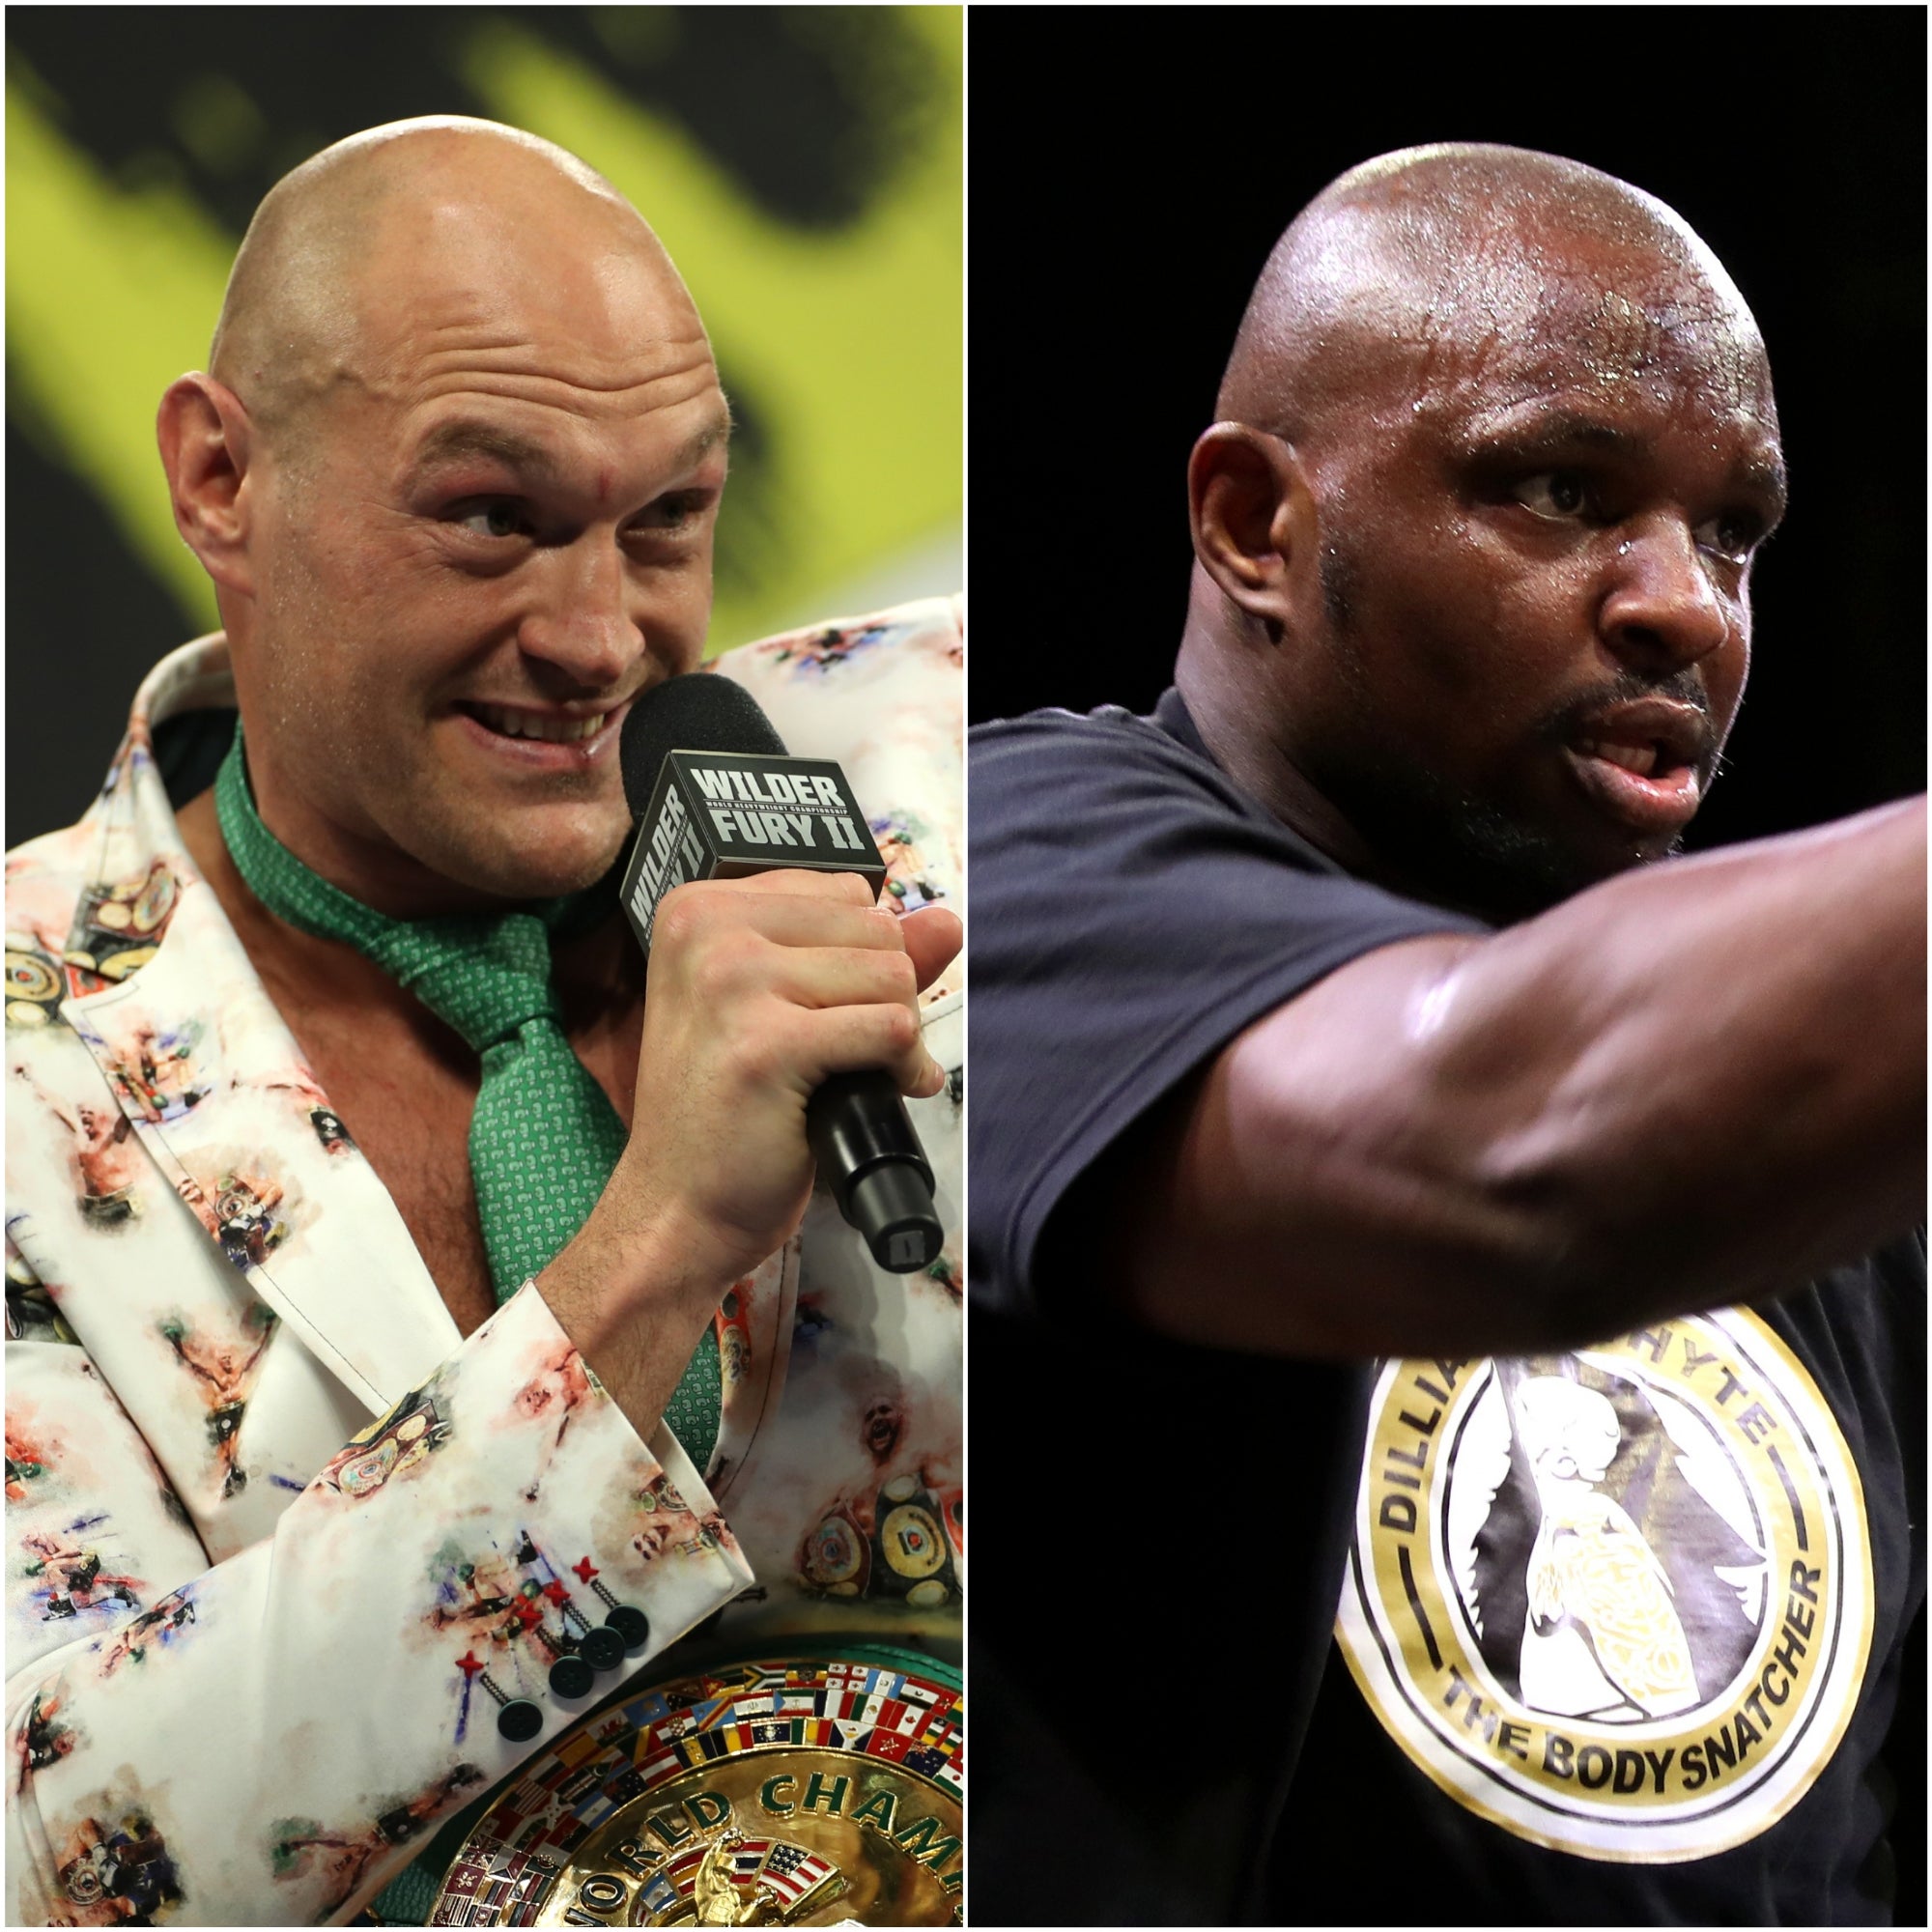 Tyson Fury and Dillian Whyte will meet at Wembley Stadium (PA)